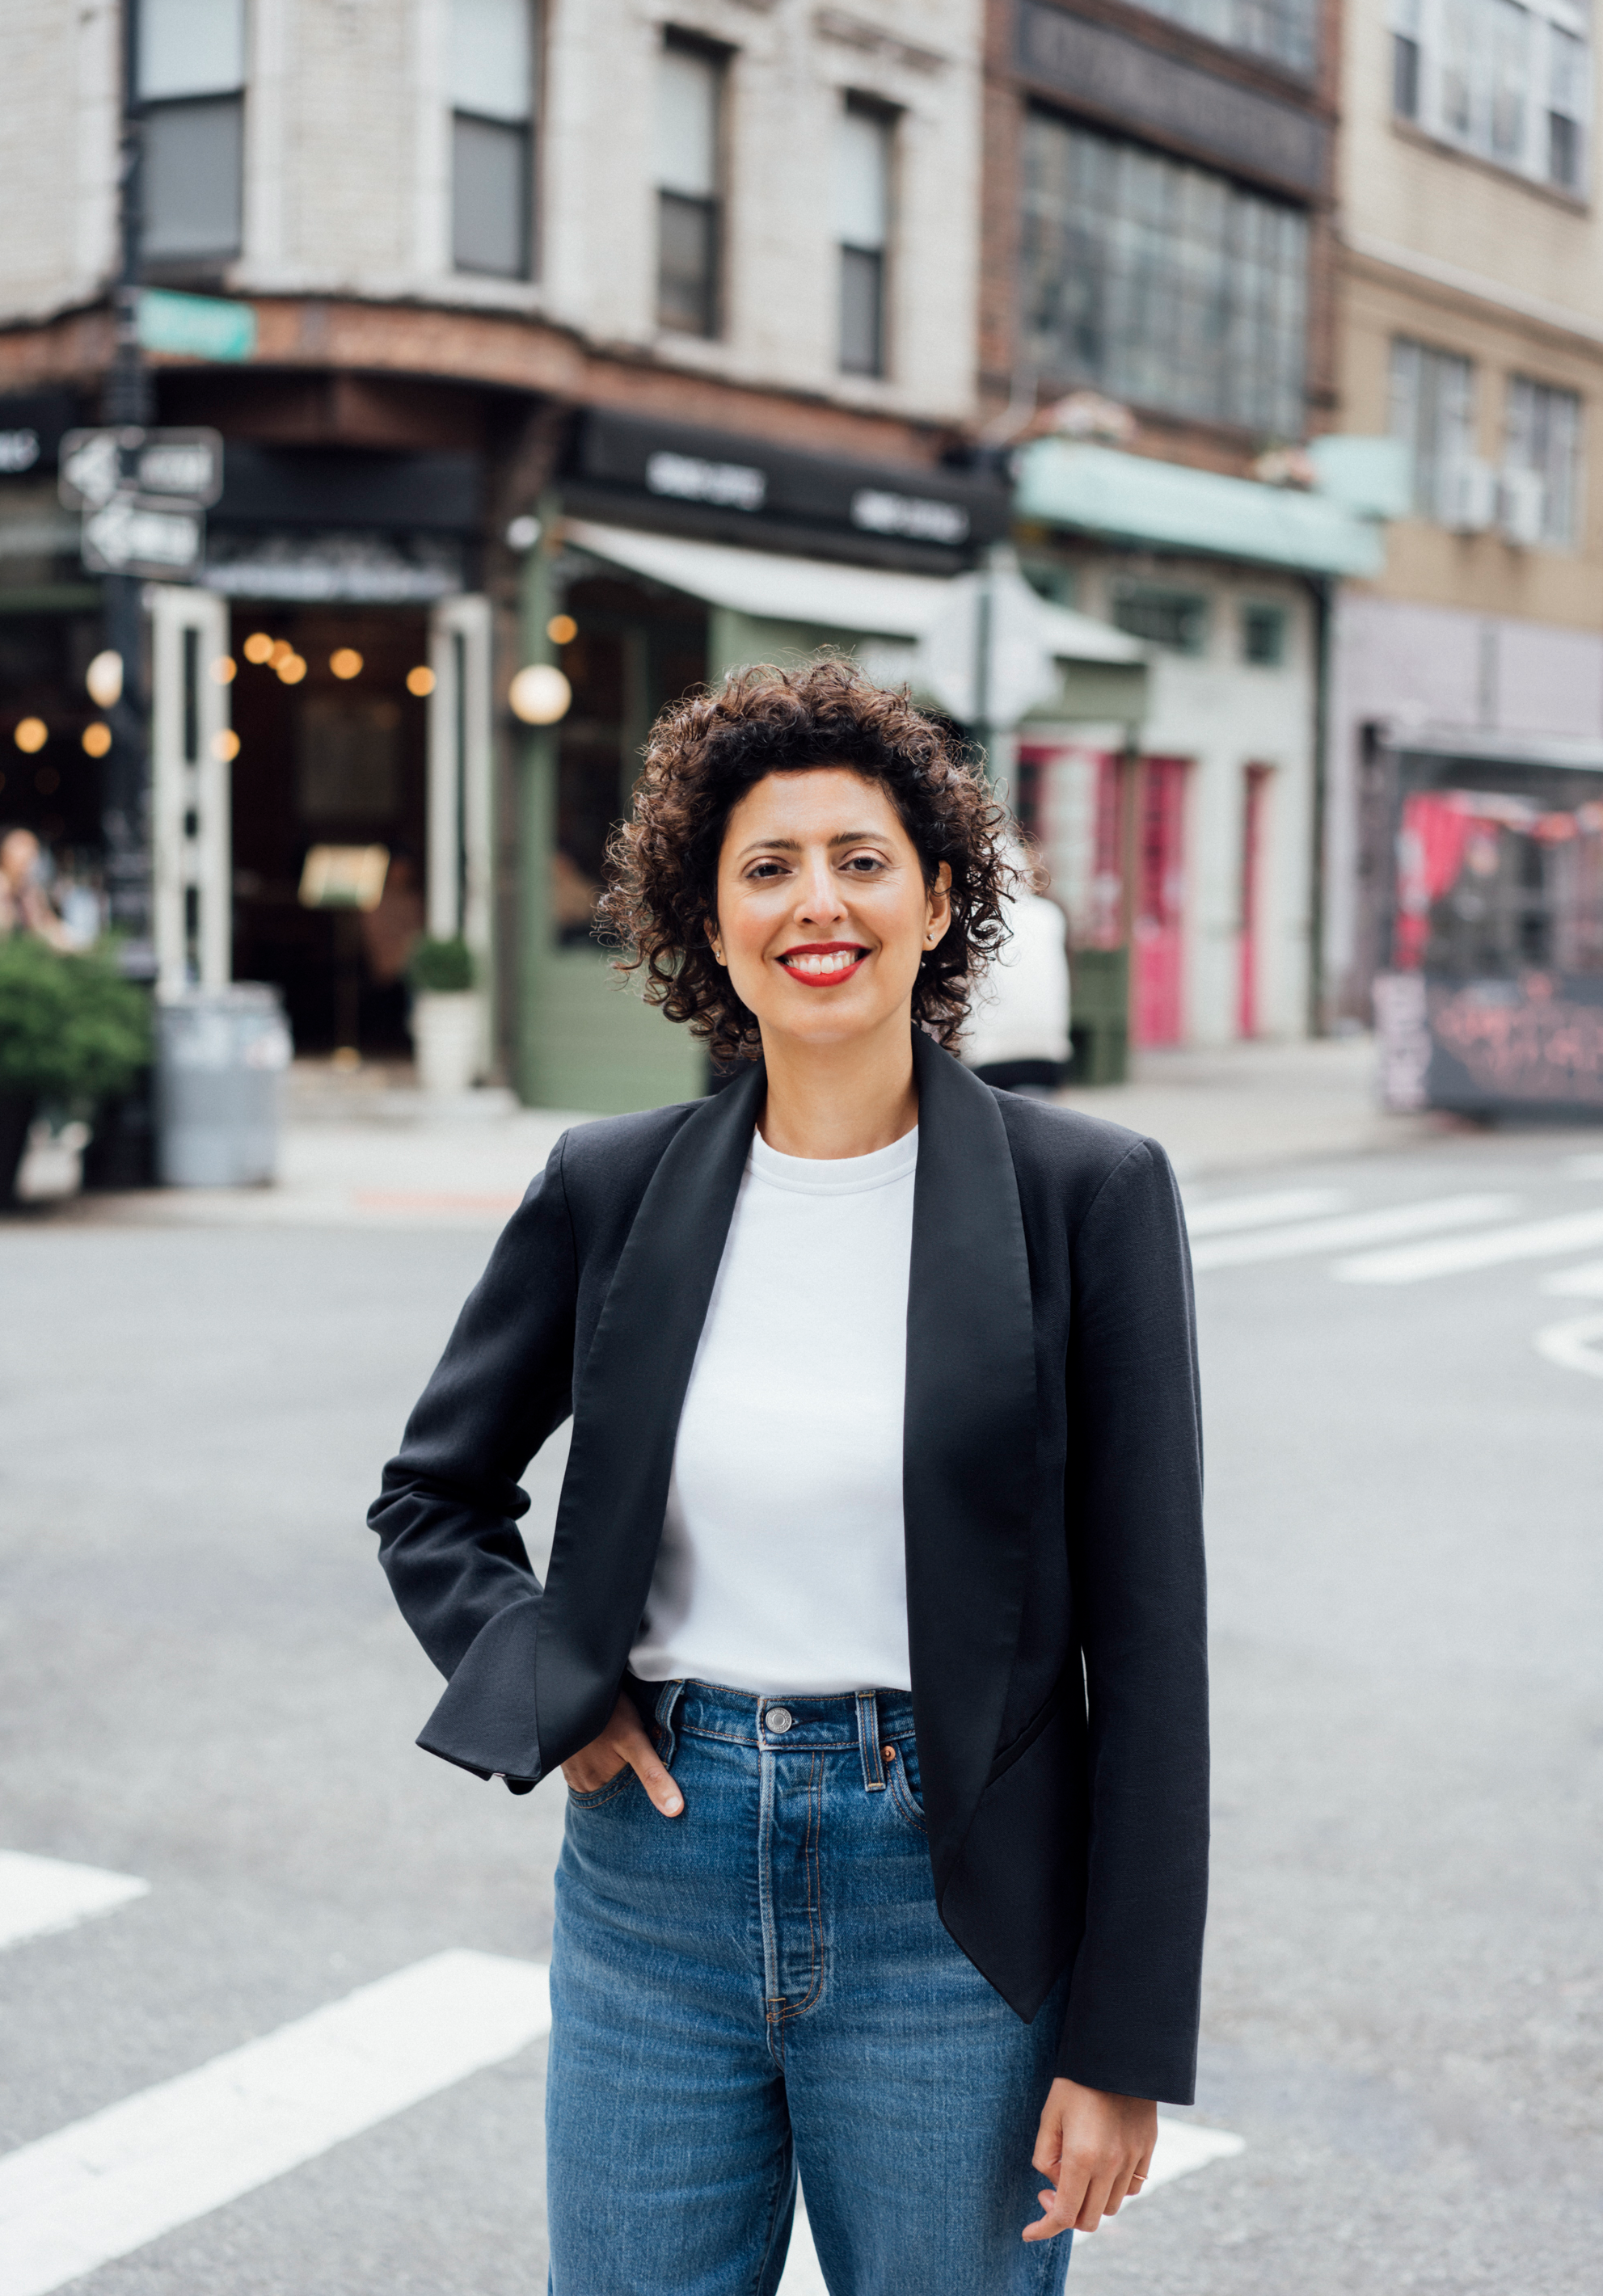 A portrait of Sara Raza standing in a city intersection with one hand in her jeans pocket. She has short curly hair and smiles at us. Photo by Asya Gorovits